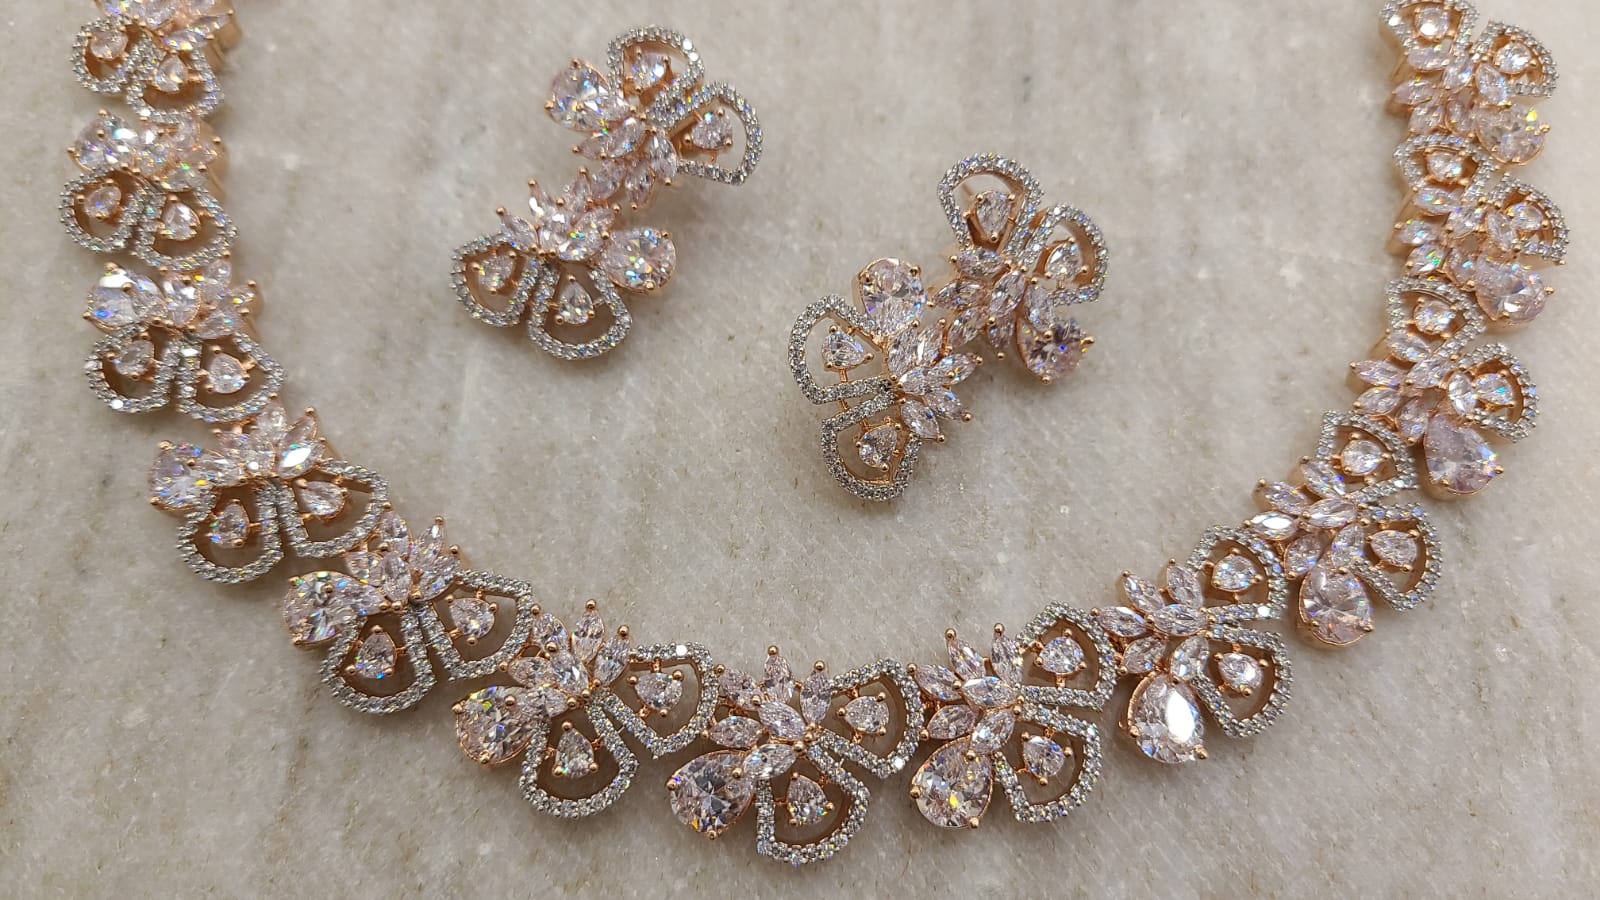 Buy Enticing Rose Gold and Diamond Necklace Set Online